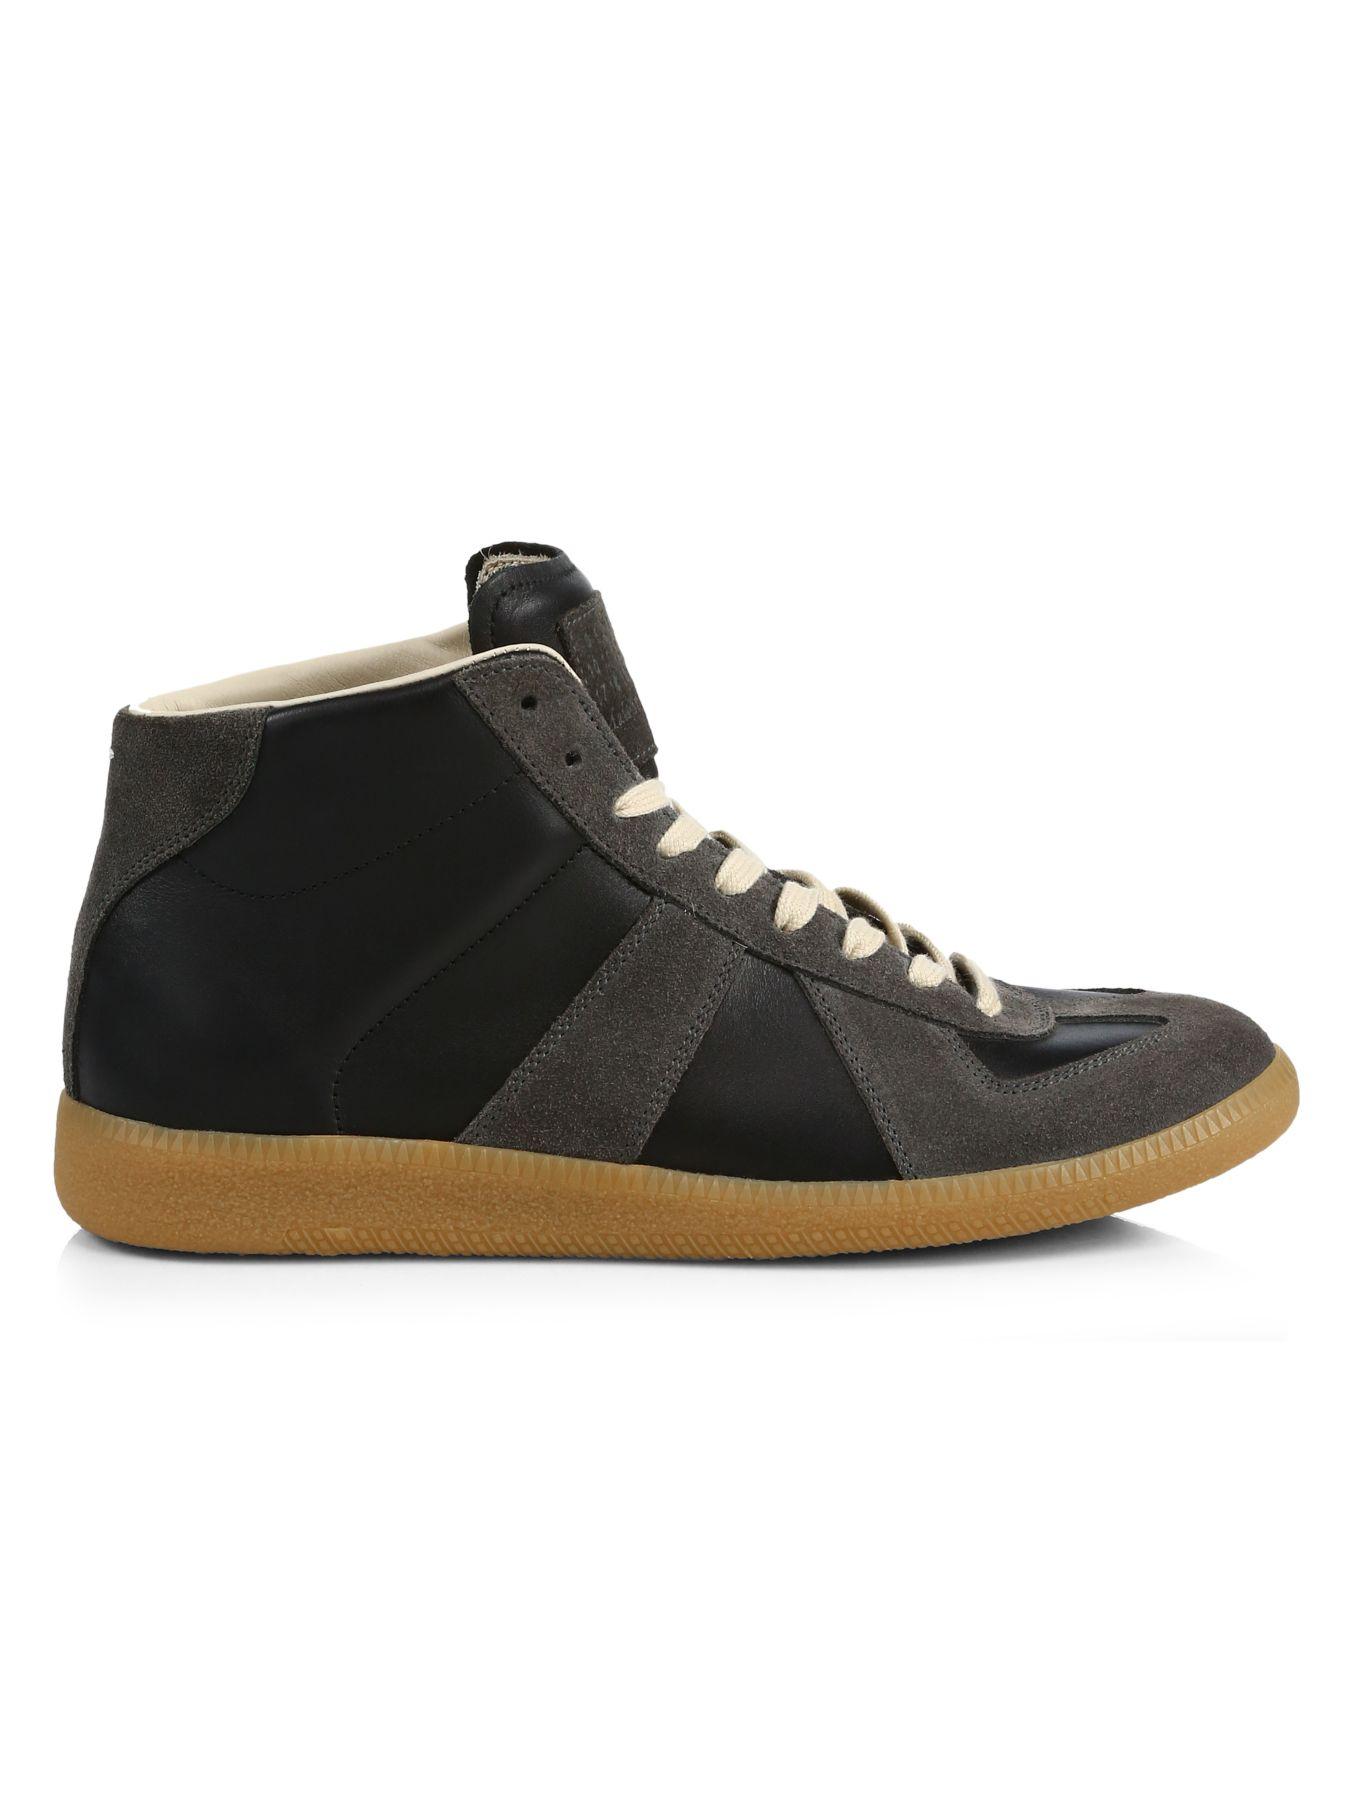 Maison Margiela Replica High-top Leather Sneakers in Black for Men - Lyst